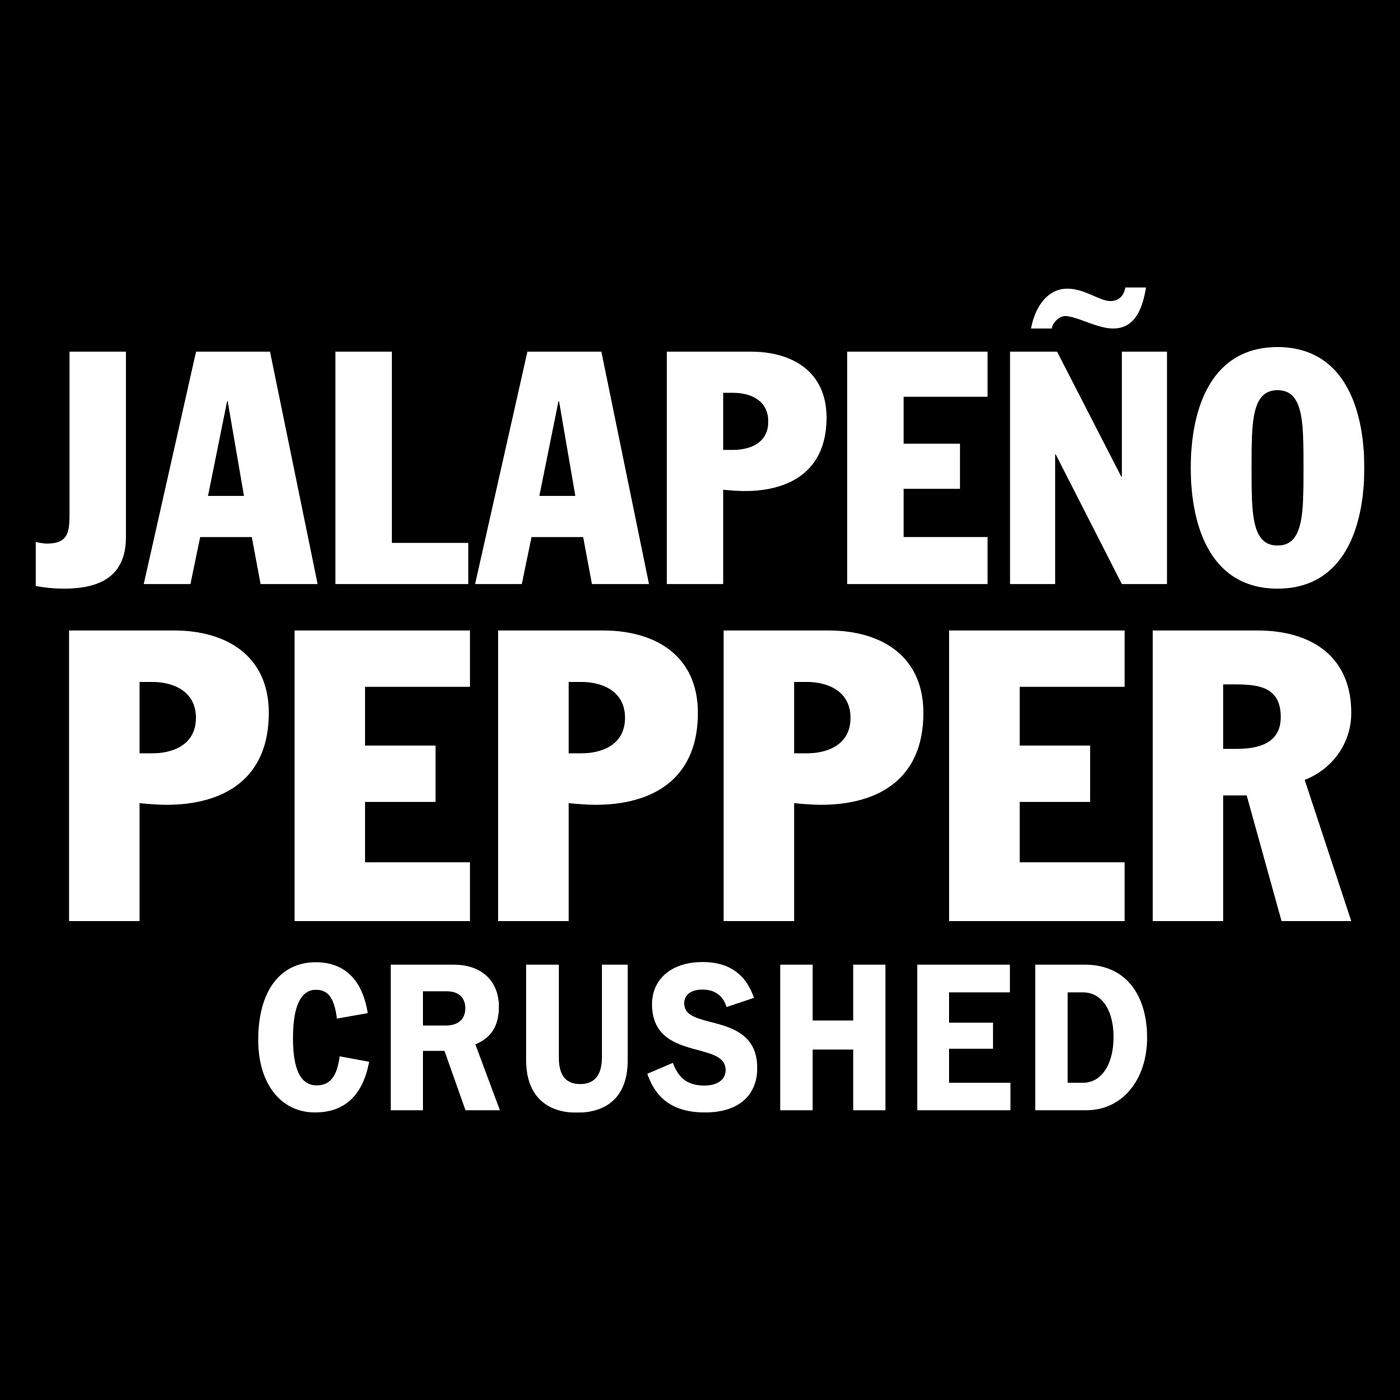 McCormick Crushed Jalapeno Pepper; image 6 of 8